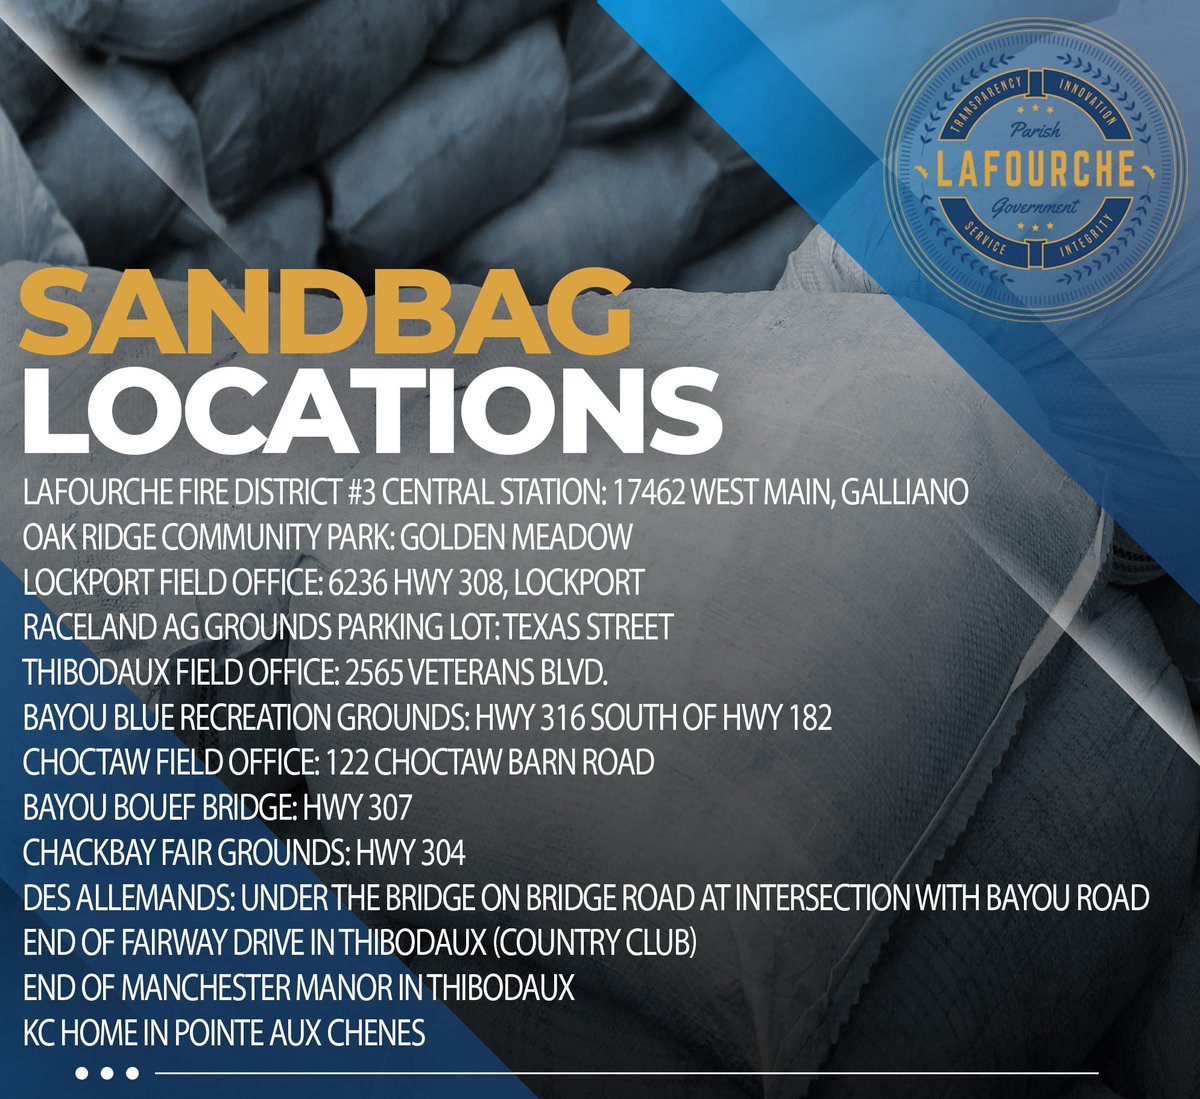 Sandbags are available at multiple locations throughout the parish, but bags are self-fill only at this time, so please bring a shovel. 4/5